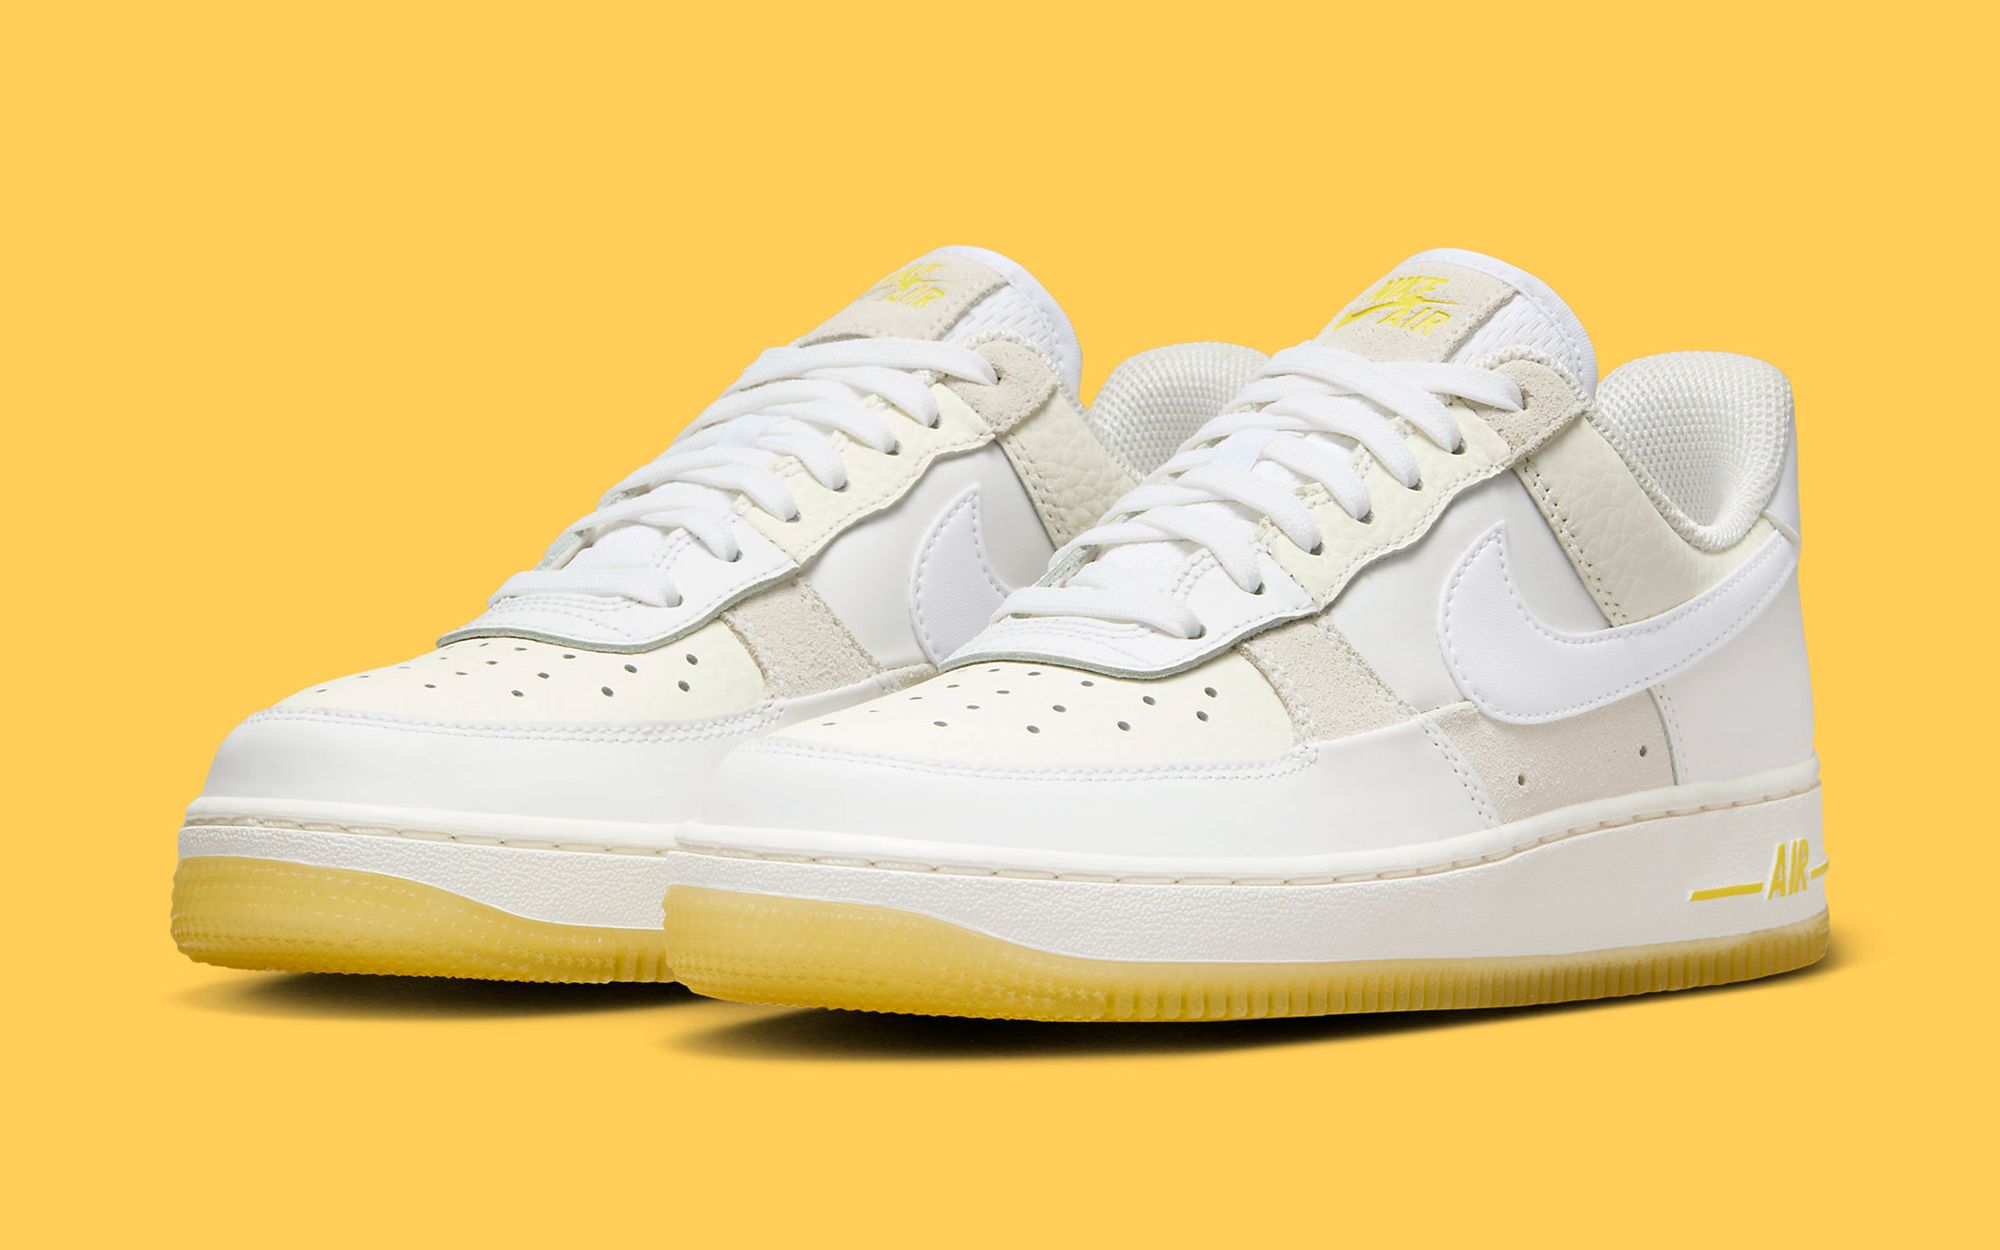 Nike Air Force 1 Low GS UV Color Change FN7239-410